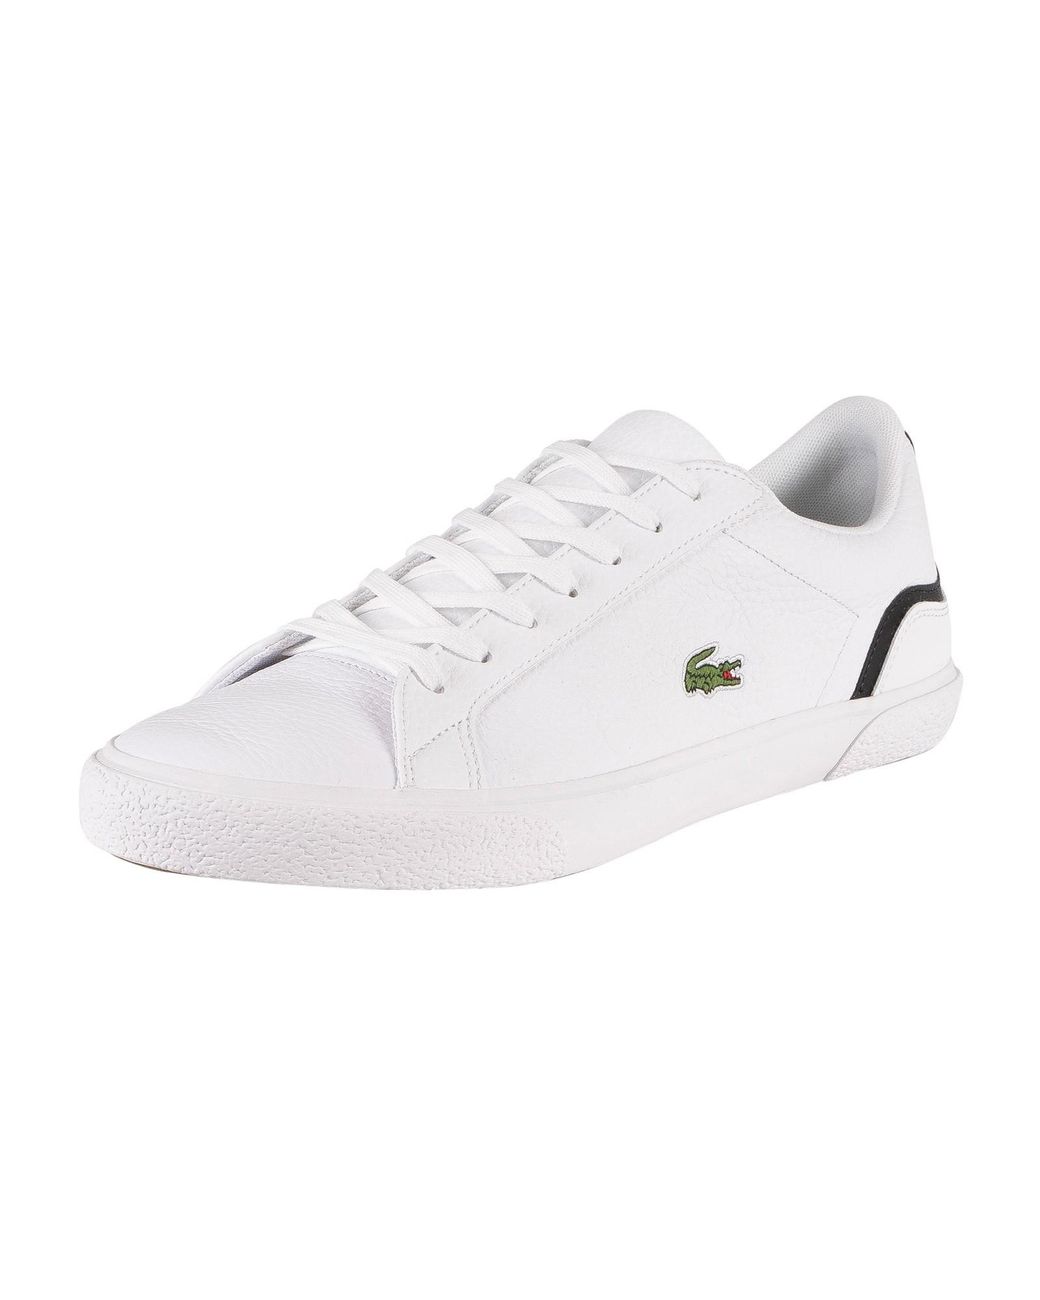 Lacoste Lerond 220 1 Cma Leather Trainers in White for Men | Lyst Australia